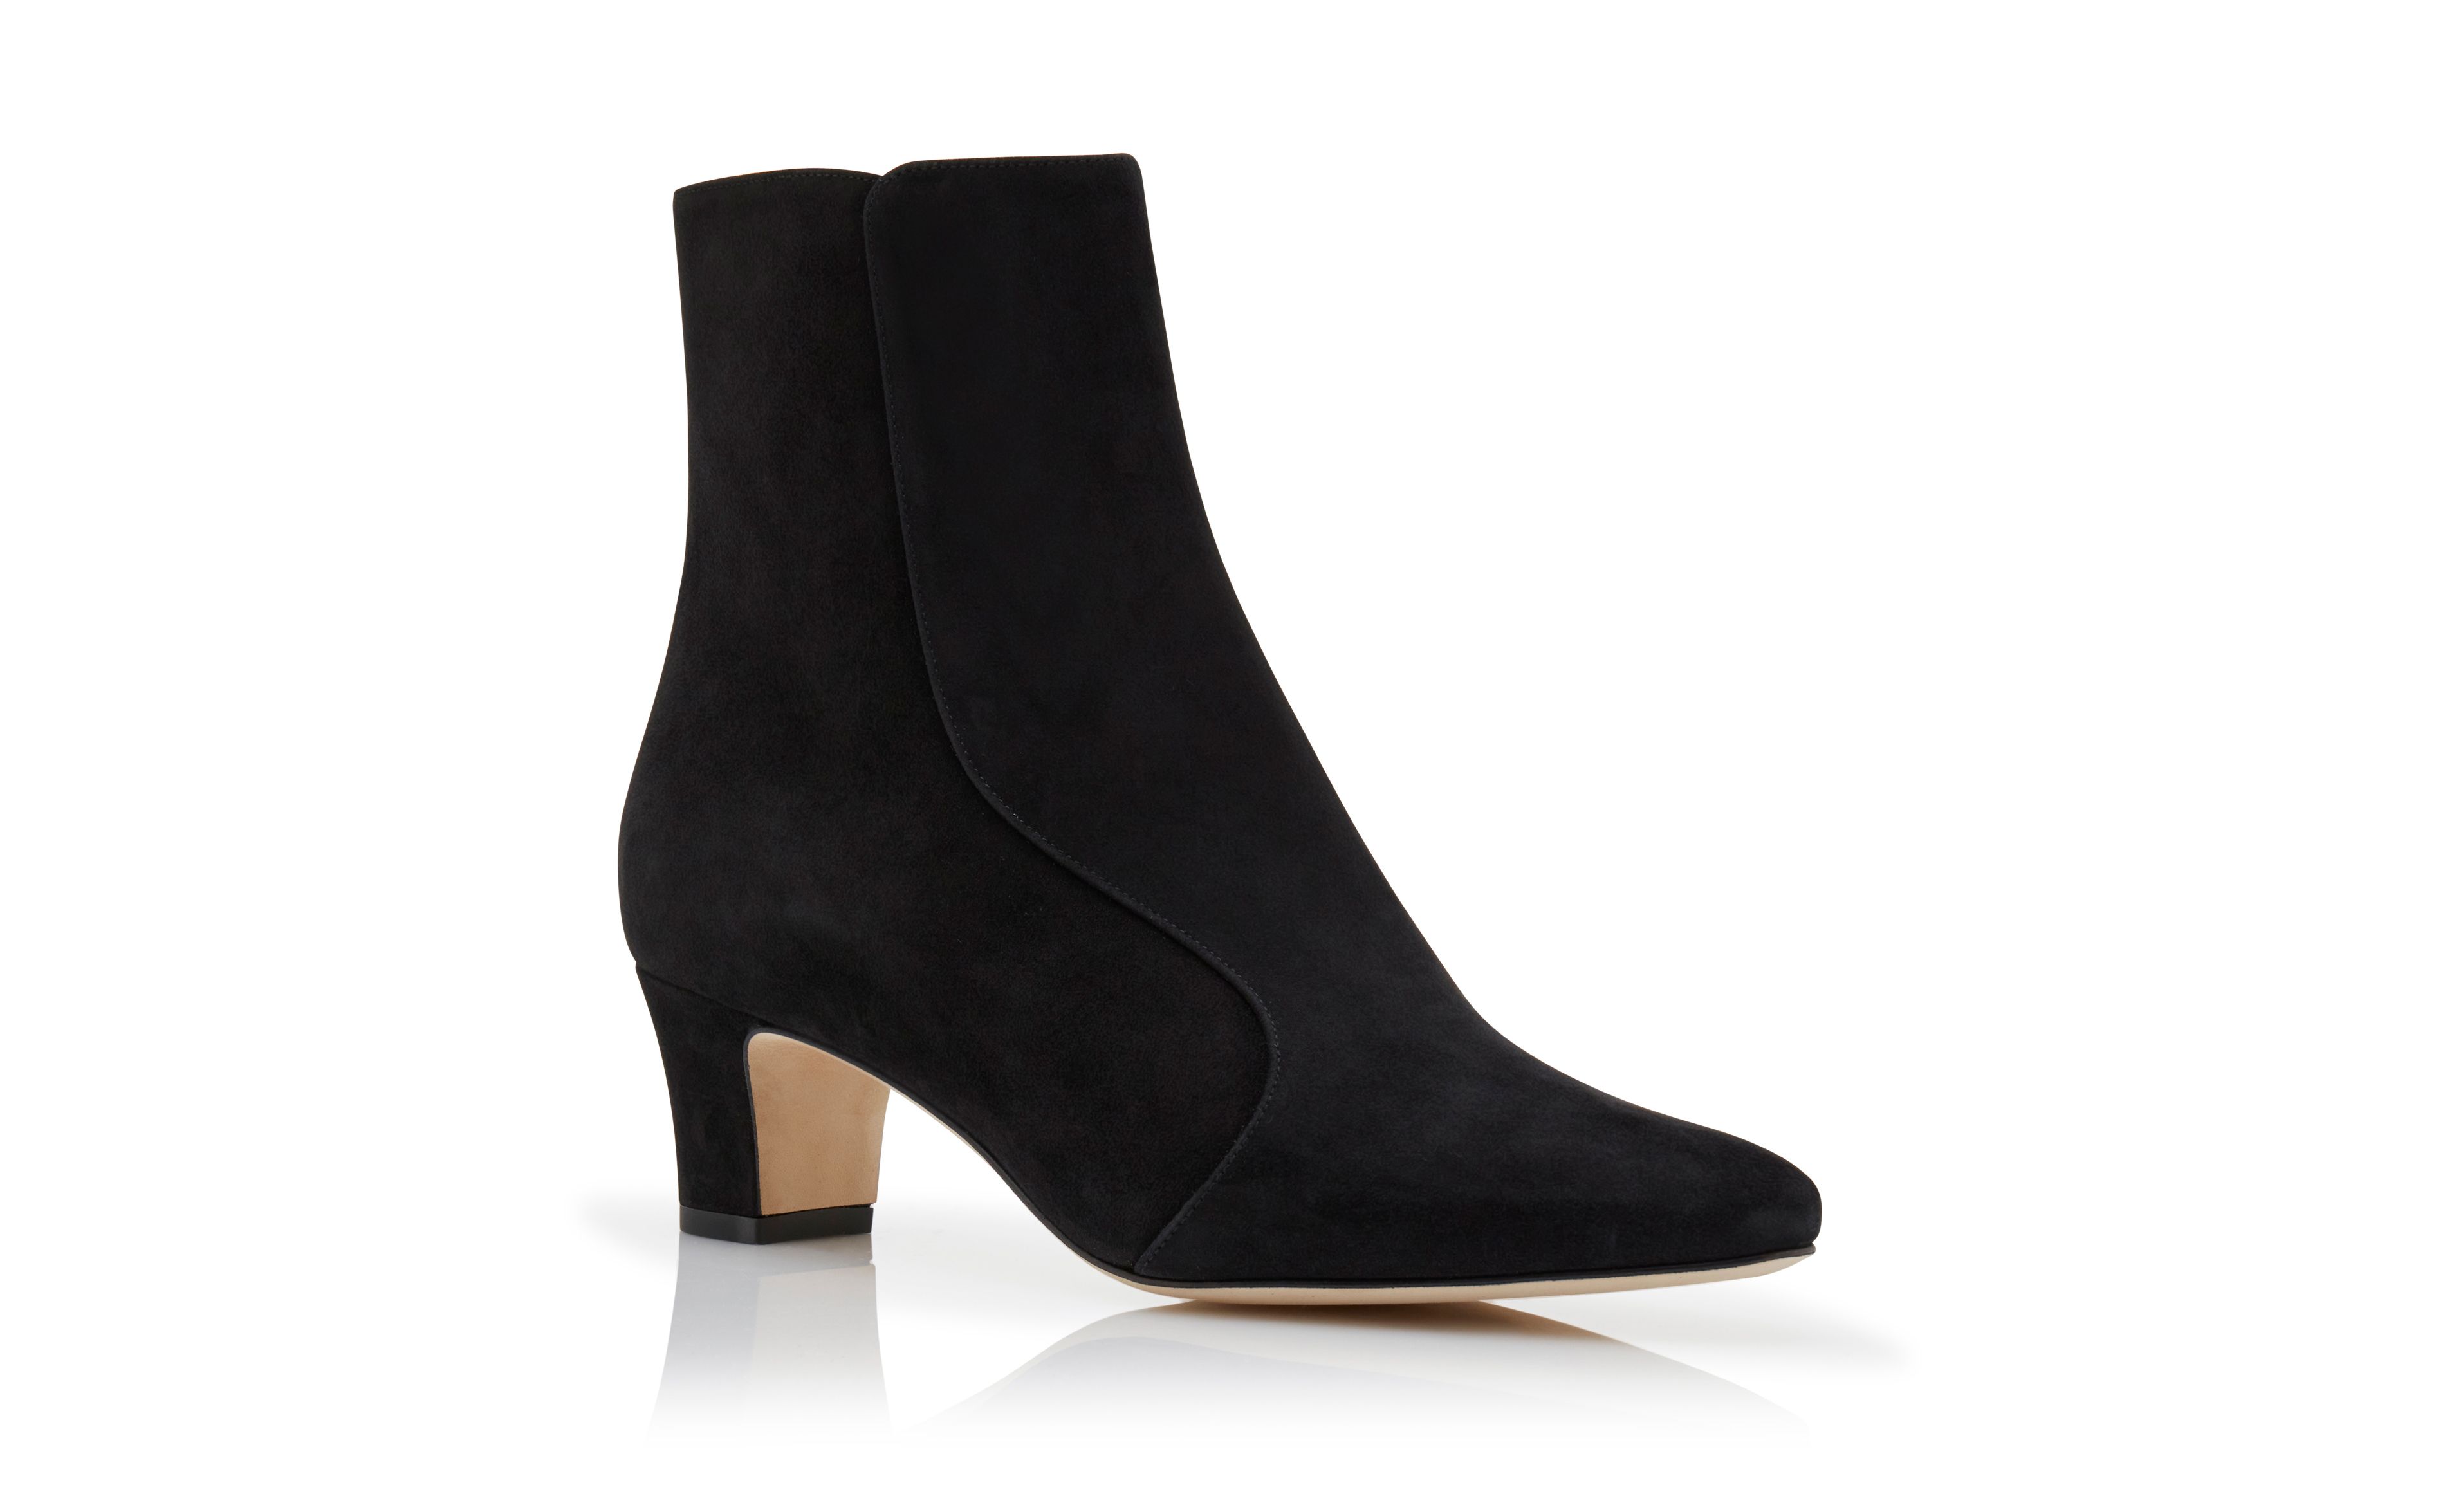 Designer Black Suede Round Toe Ankle Boots - Image Upsell